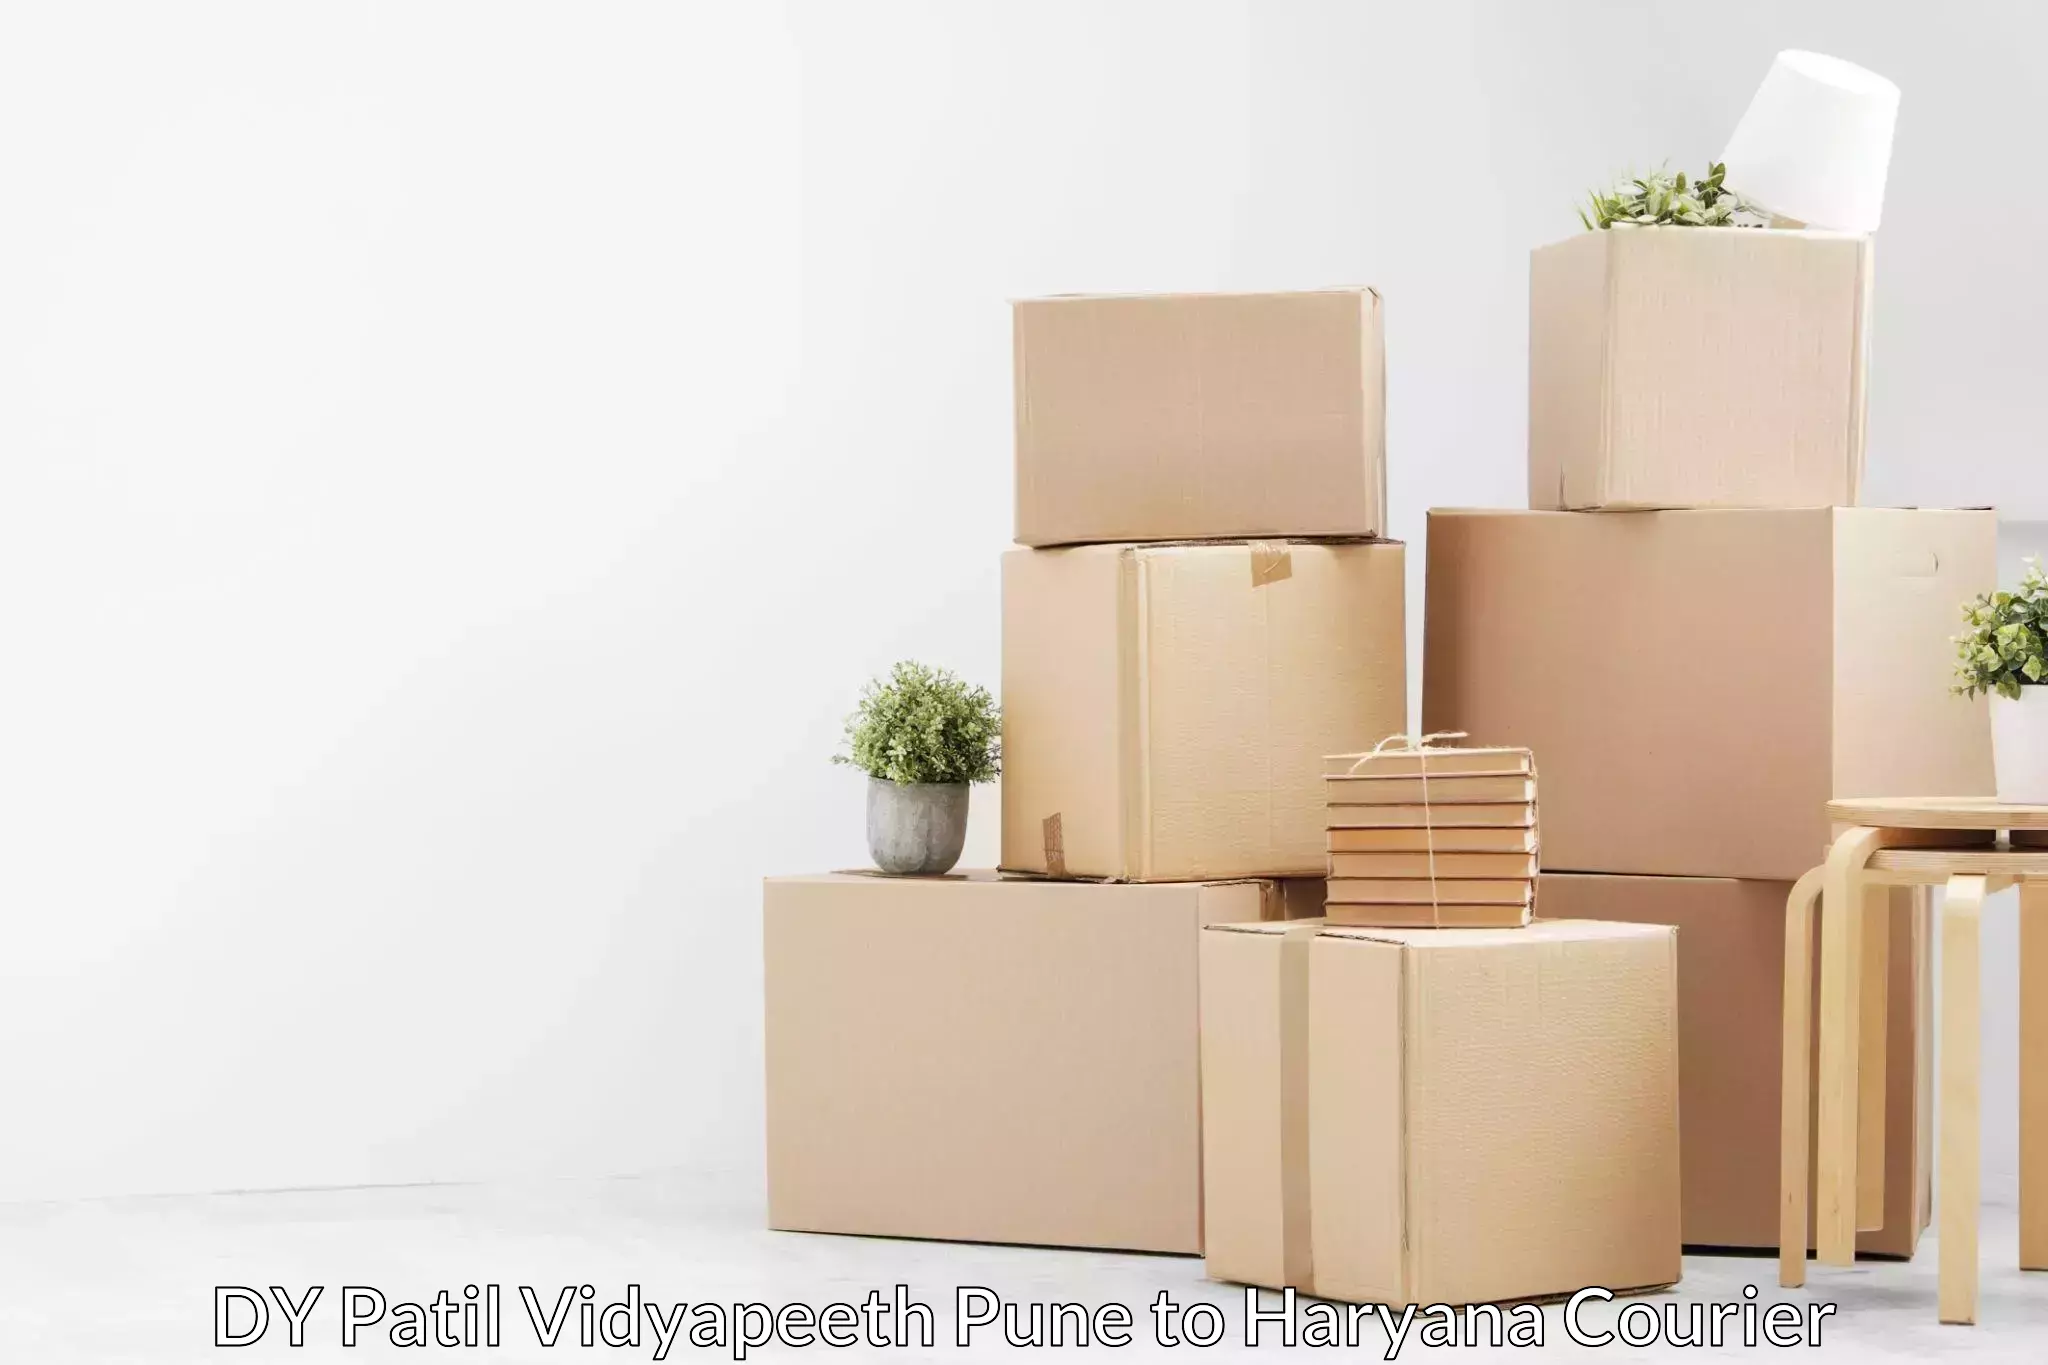 Efficient relocation services DY Patil Vidyapeeth Pune to Karnal